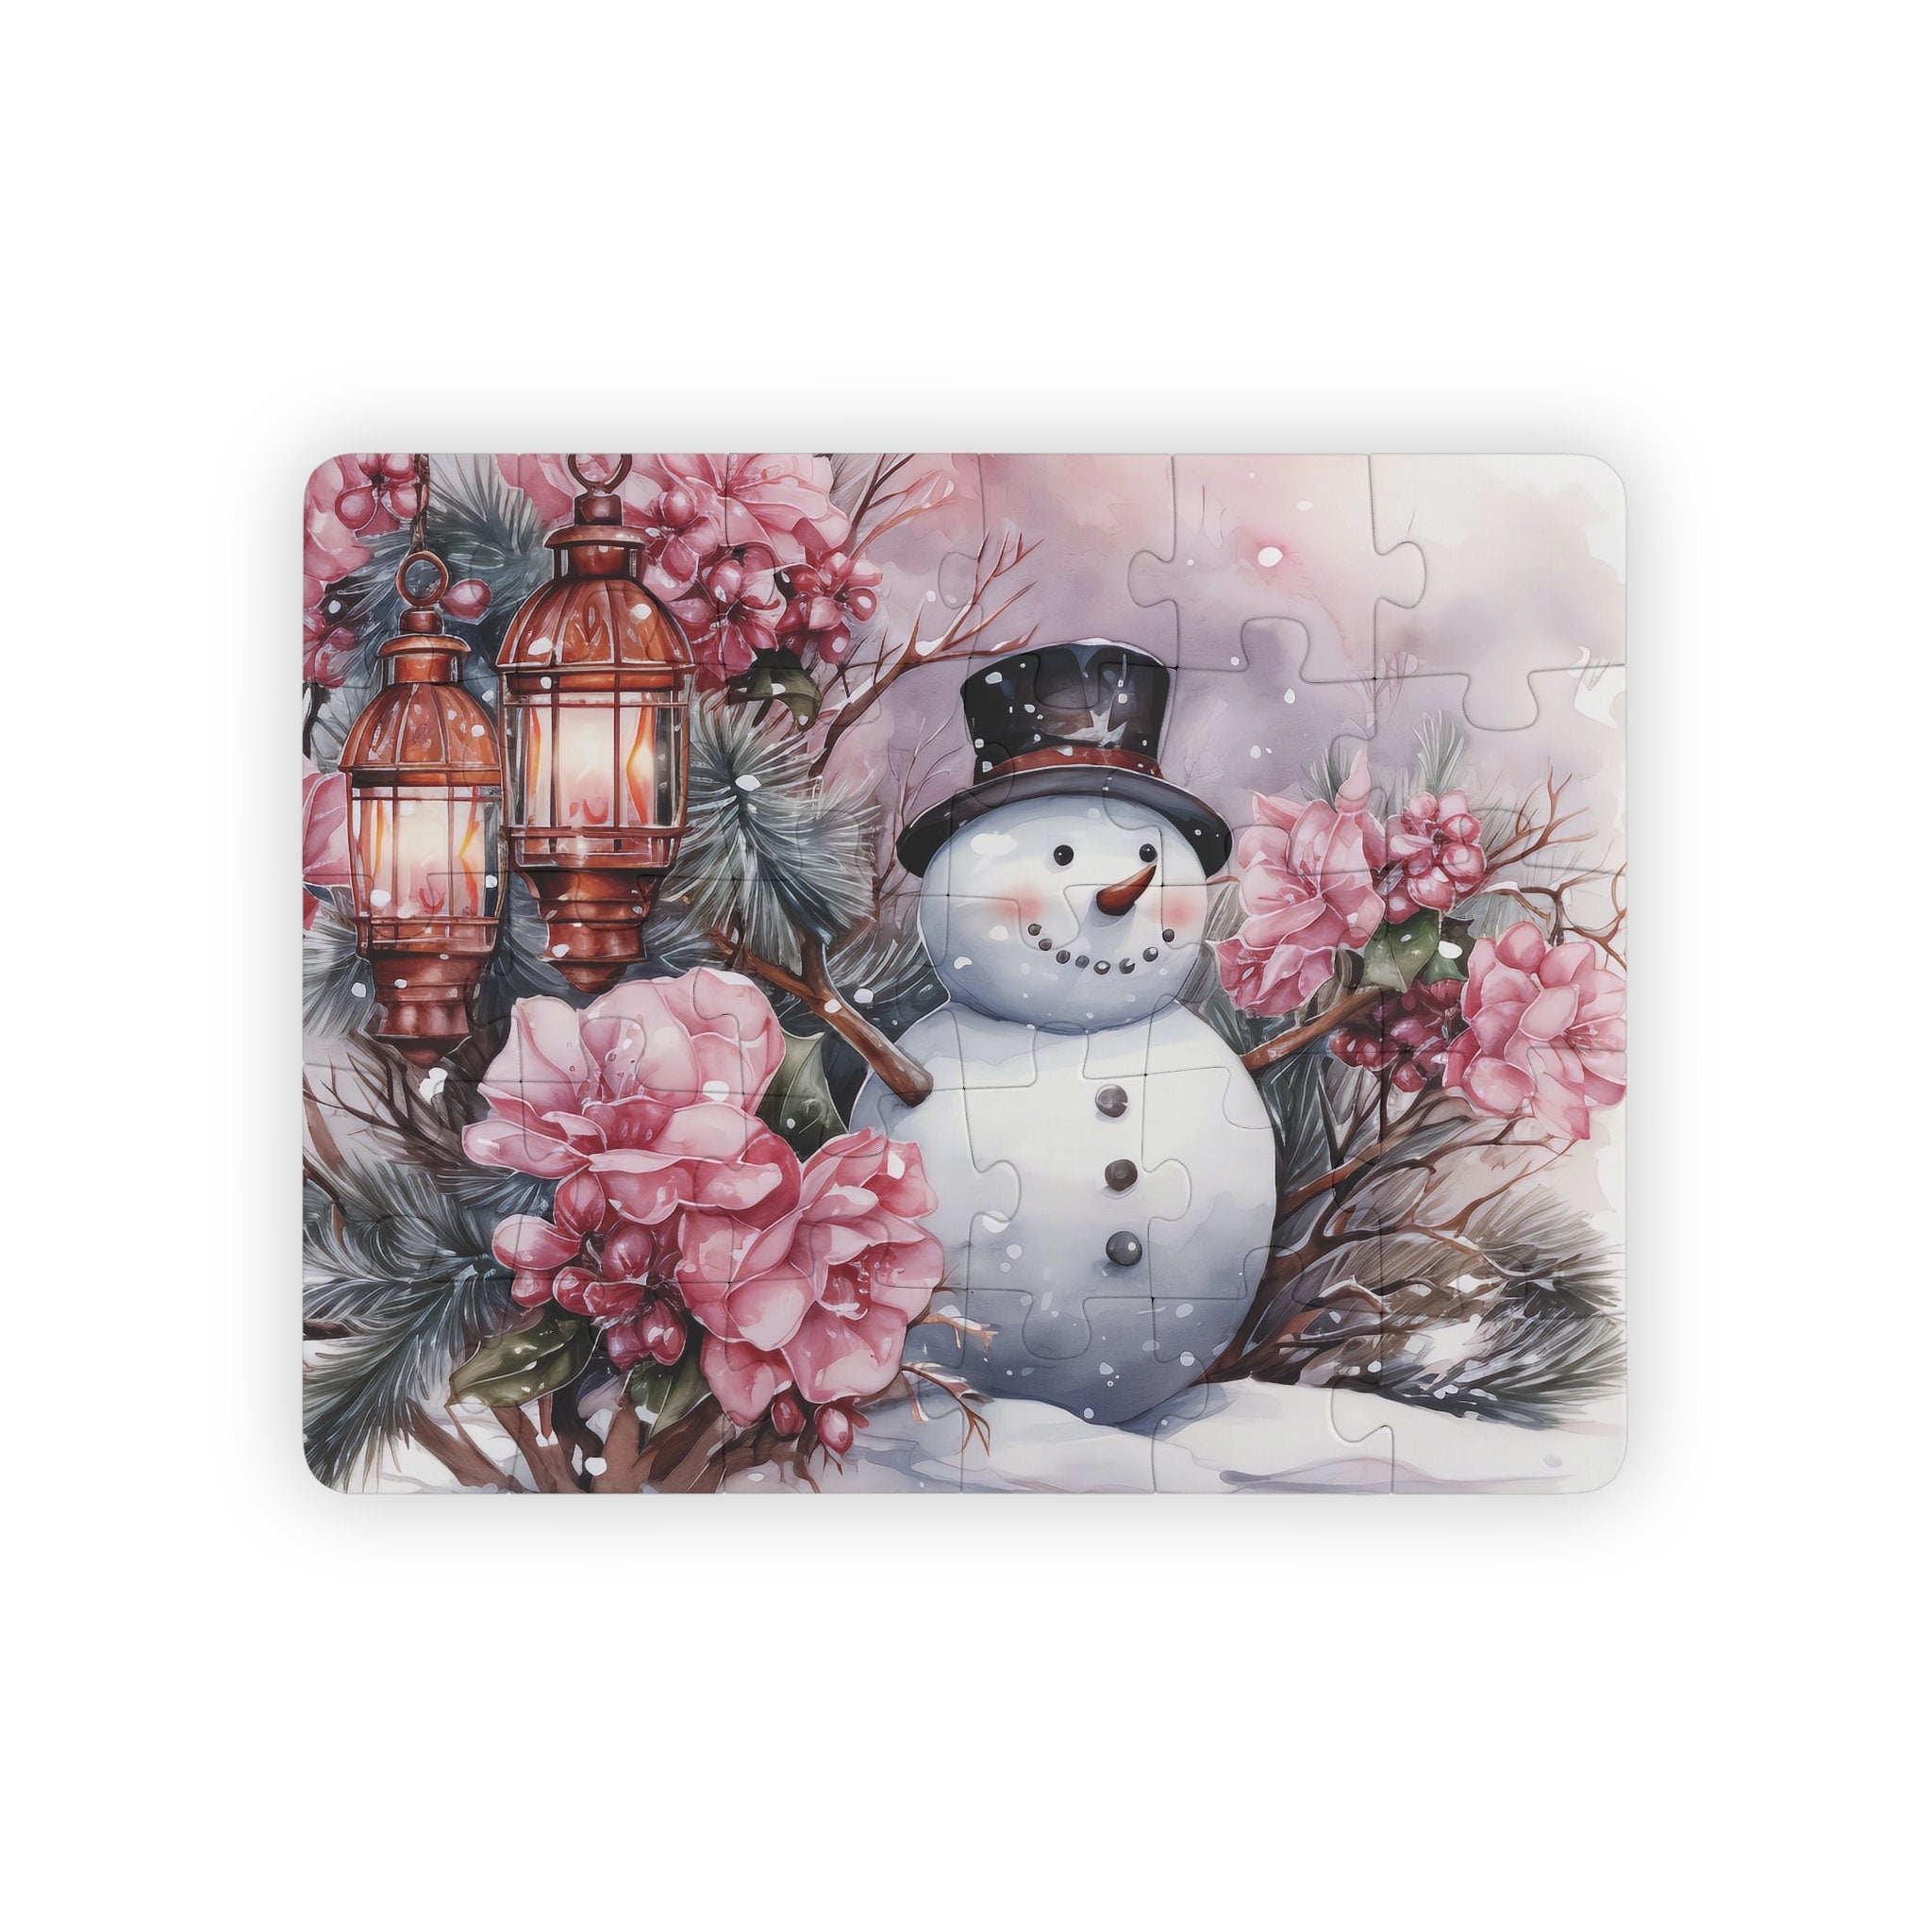 Snowman Children's Puzzle | 30-Piece Toddler-Friendly Jigsaw | Large Pieces, Rounded Corners for Safety